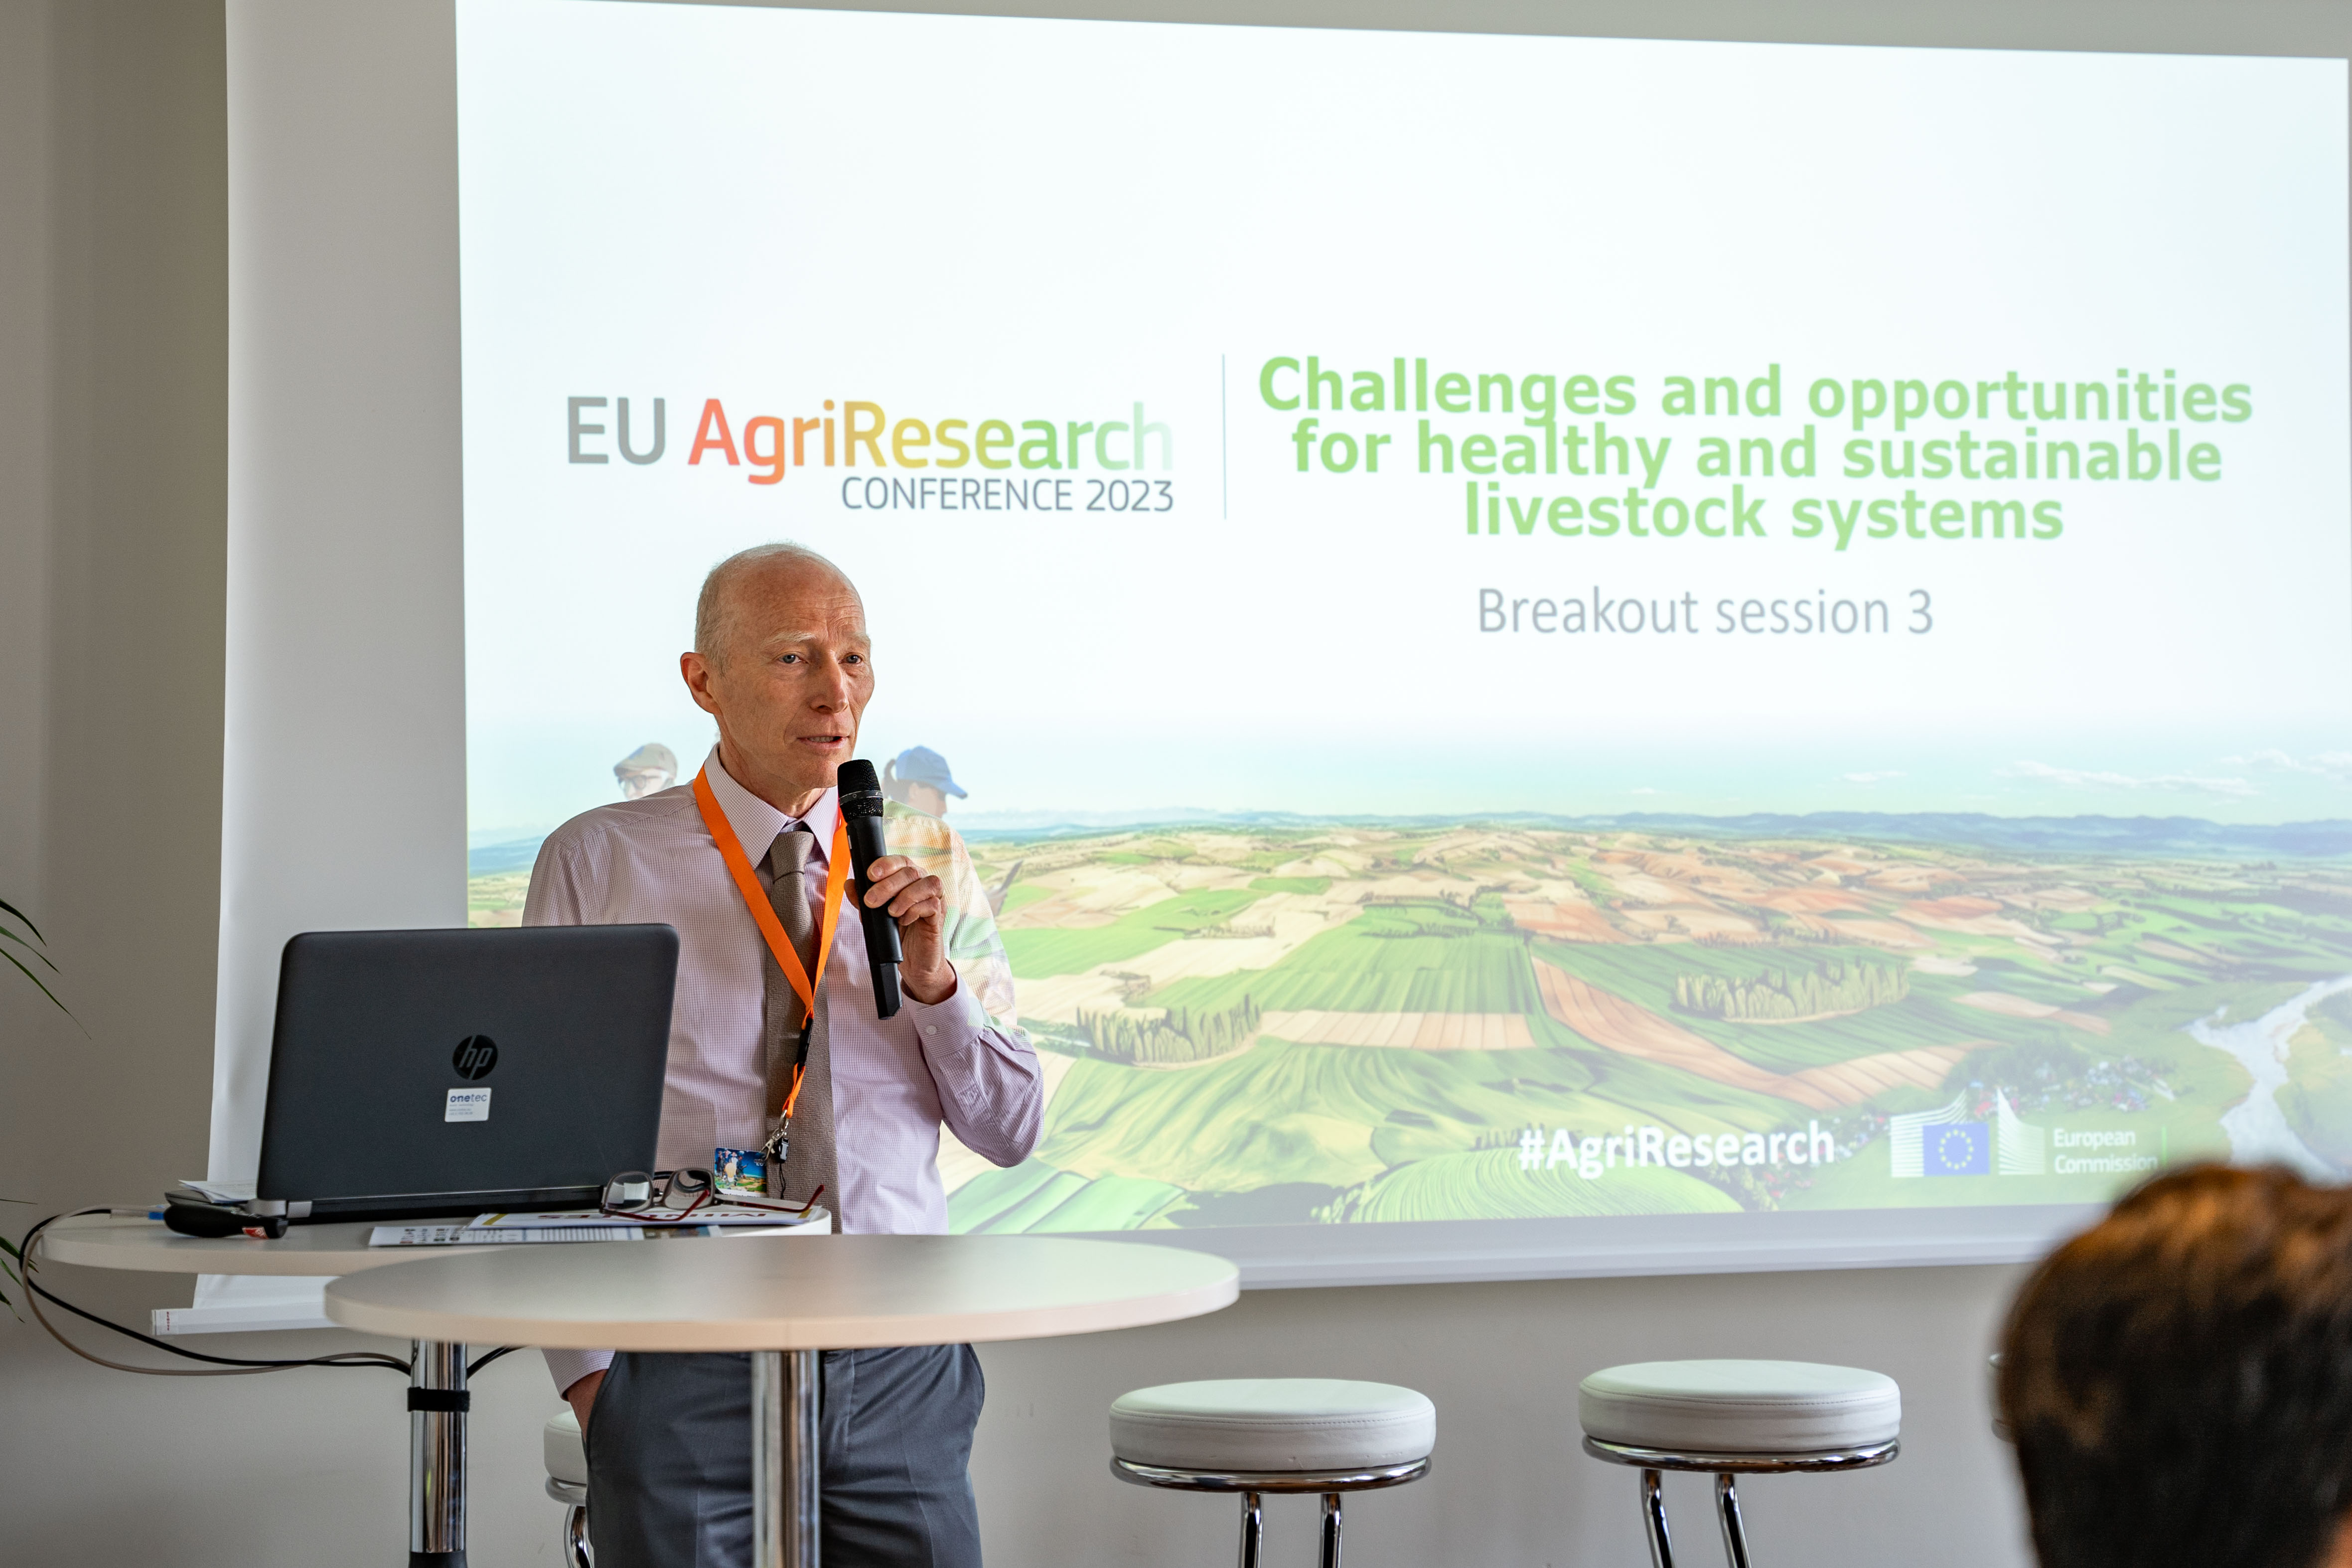 Jean-Charles Cavitte – EU AgriResearch Conference 2023